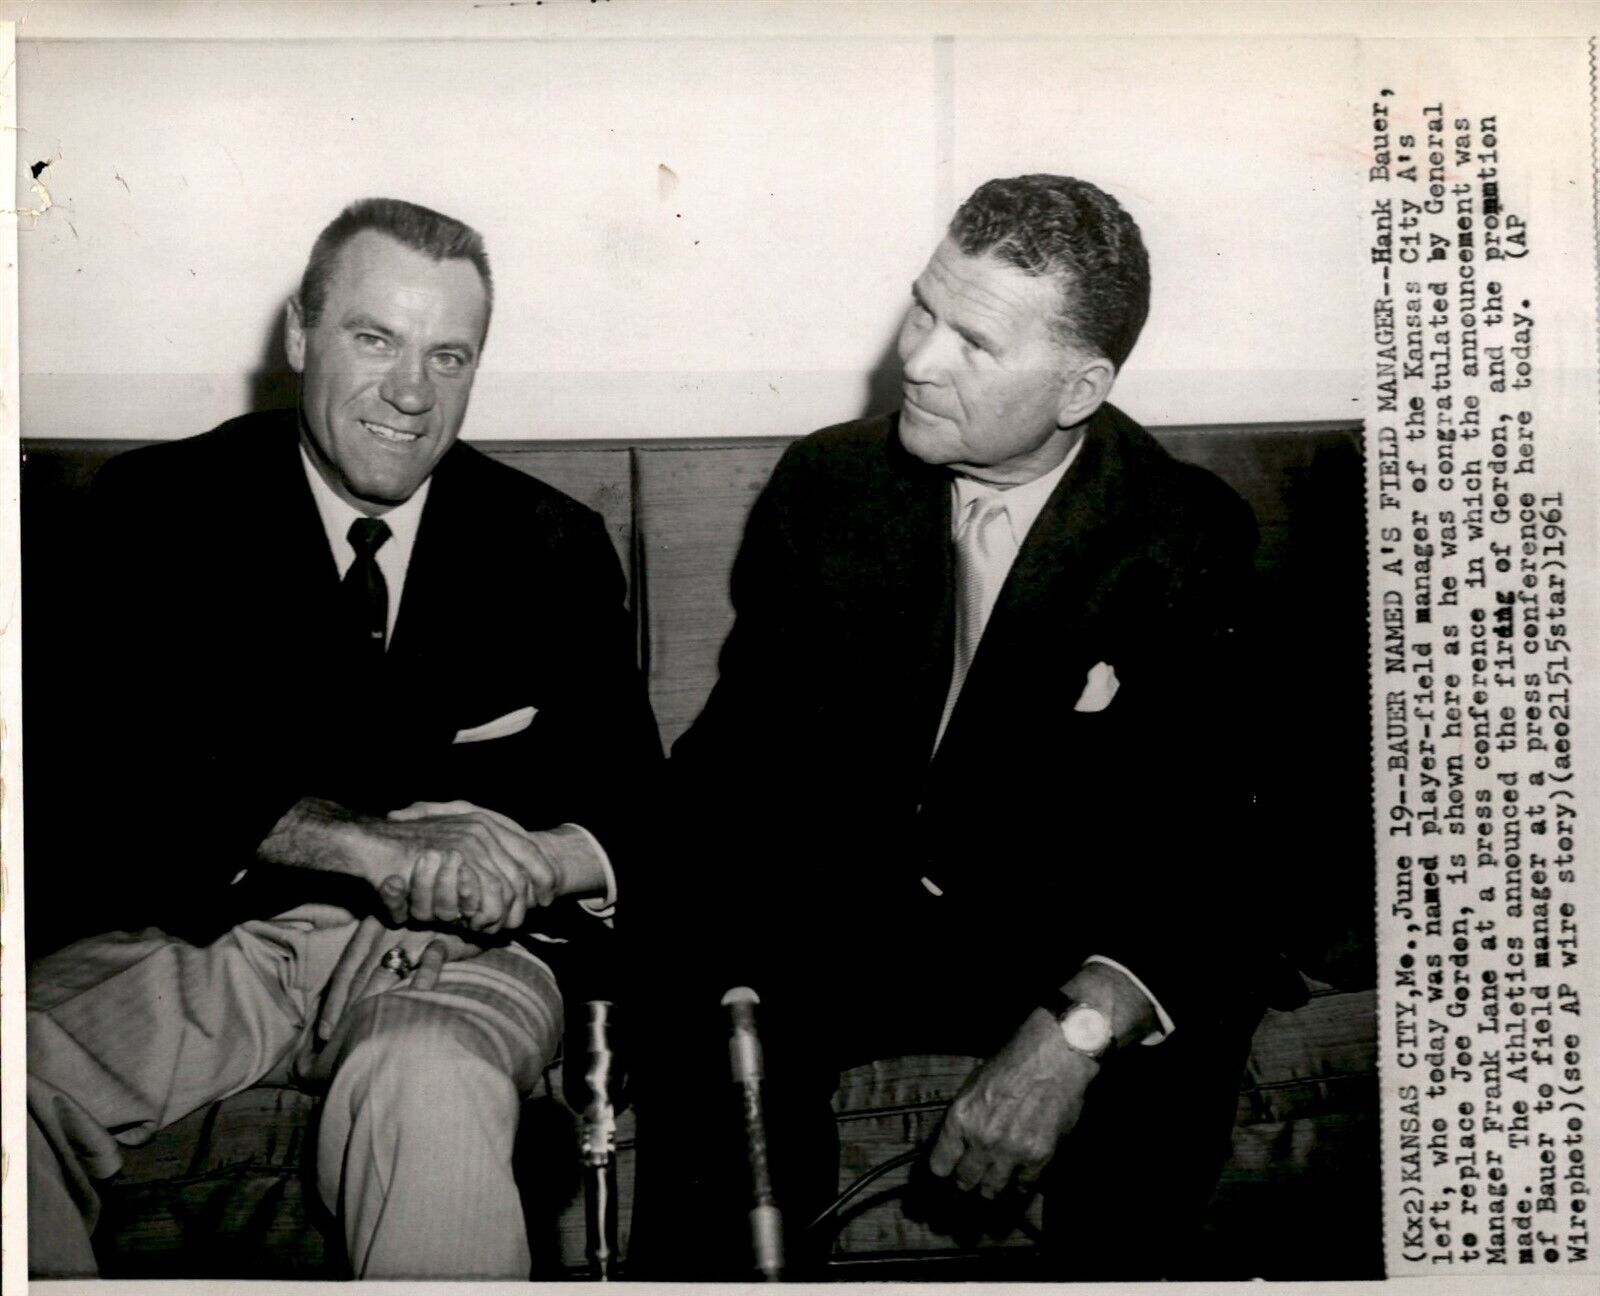 LG910 1961 Wire Photo HANK BAUER NAMED KANSAS CITY A\'S FIELD MANAGER FRANK LANE